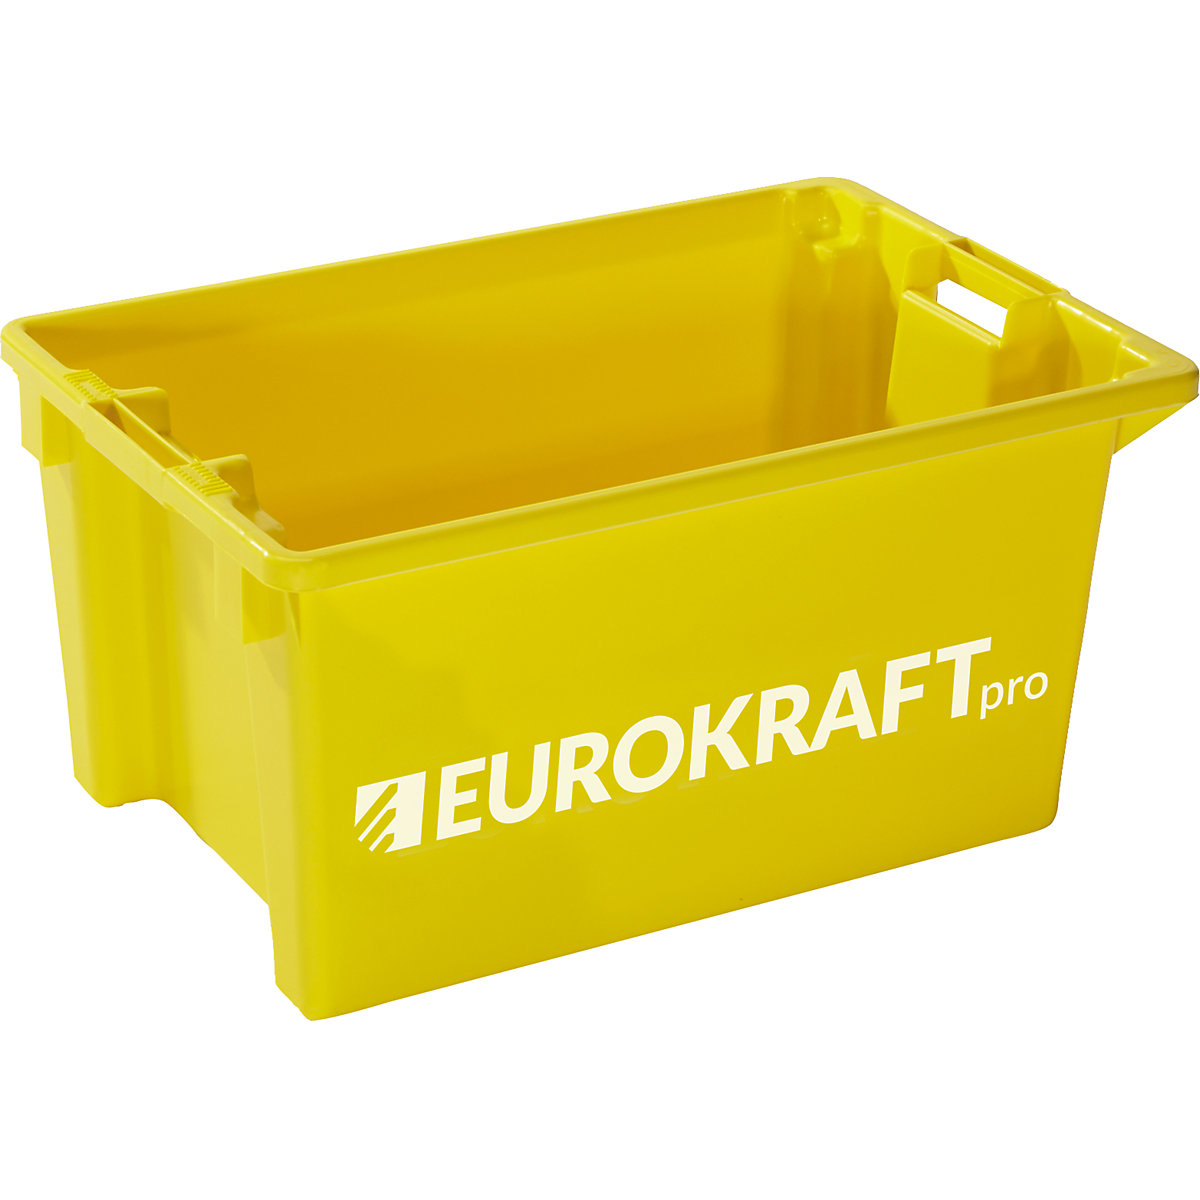 Stack/nest container – eurokraft pro, capacity 50 l, pack of 3, yellow-2